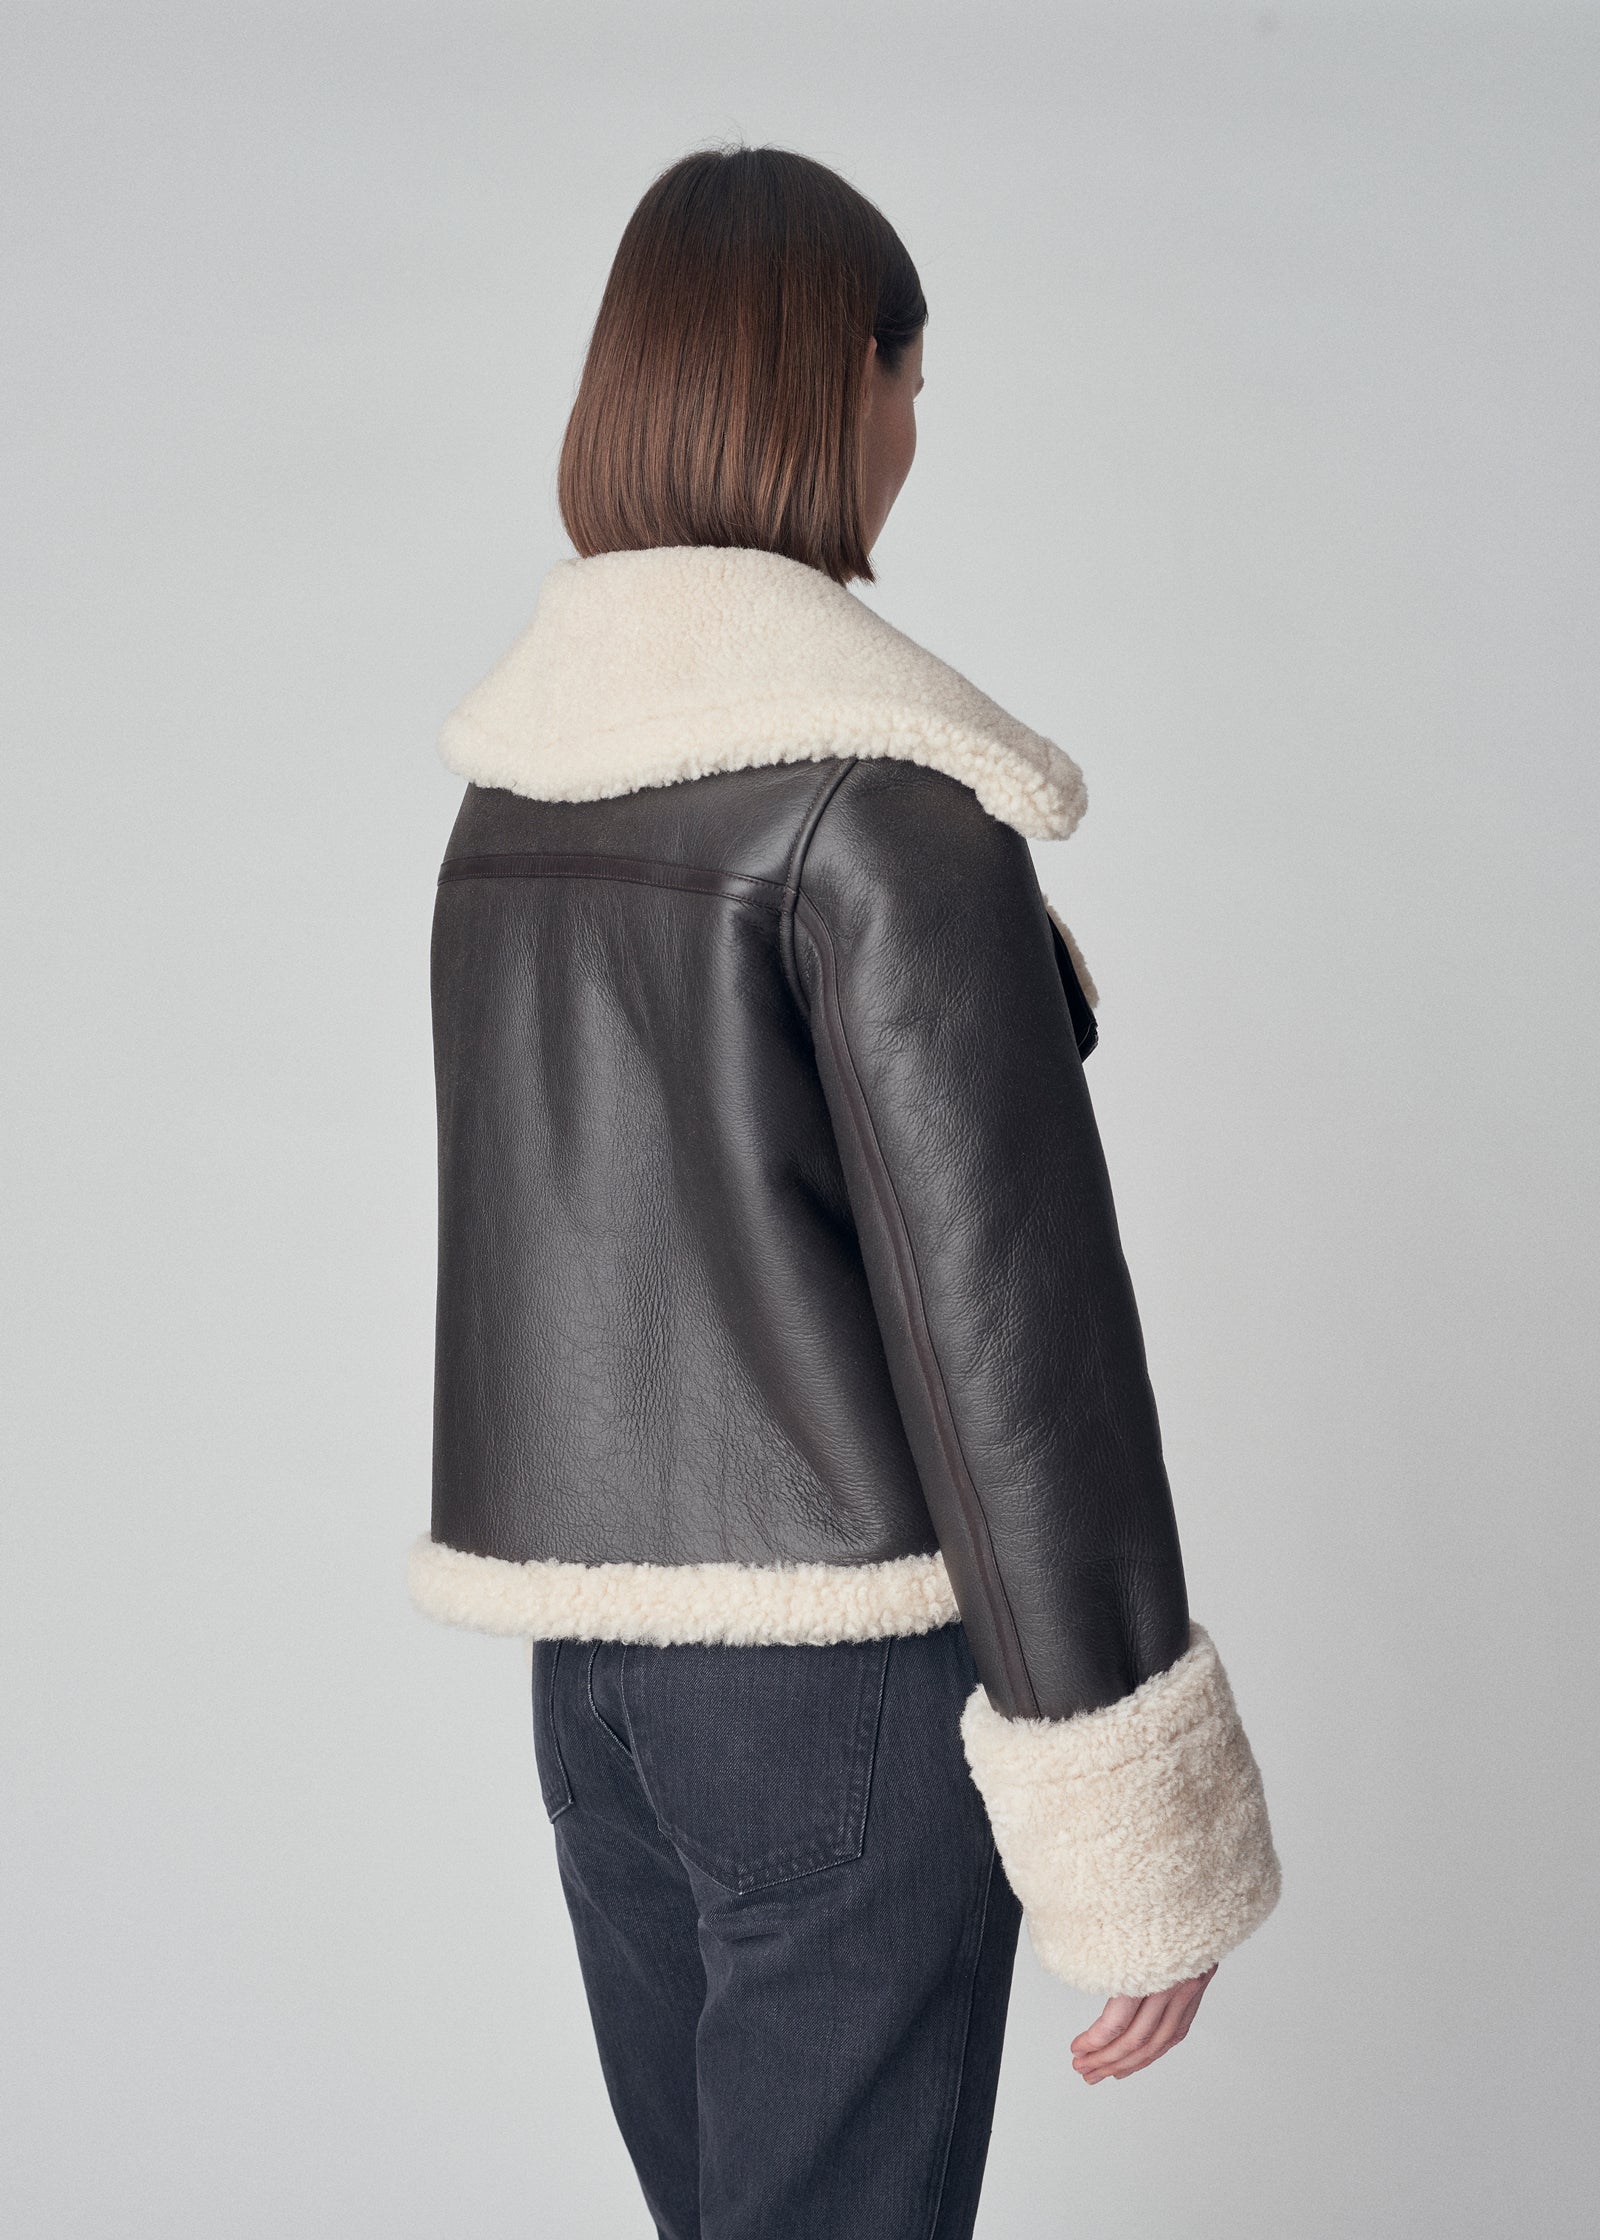 Cropped Moto Jacket in Shearling Leather - Espresso - CO Collections